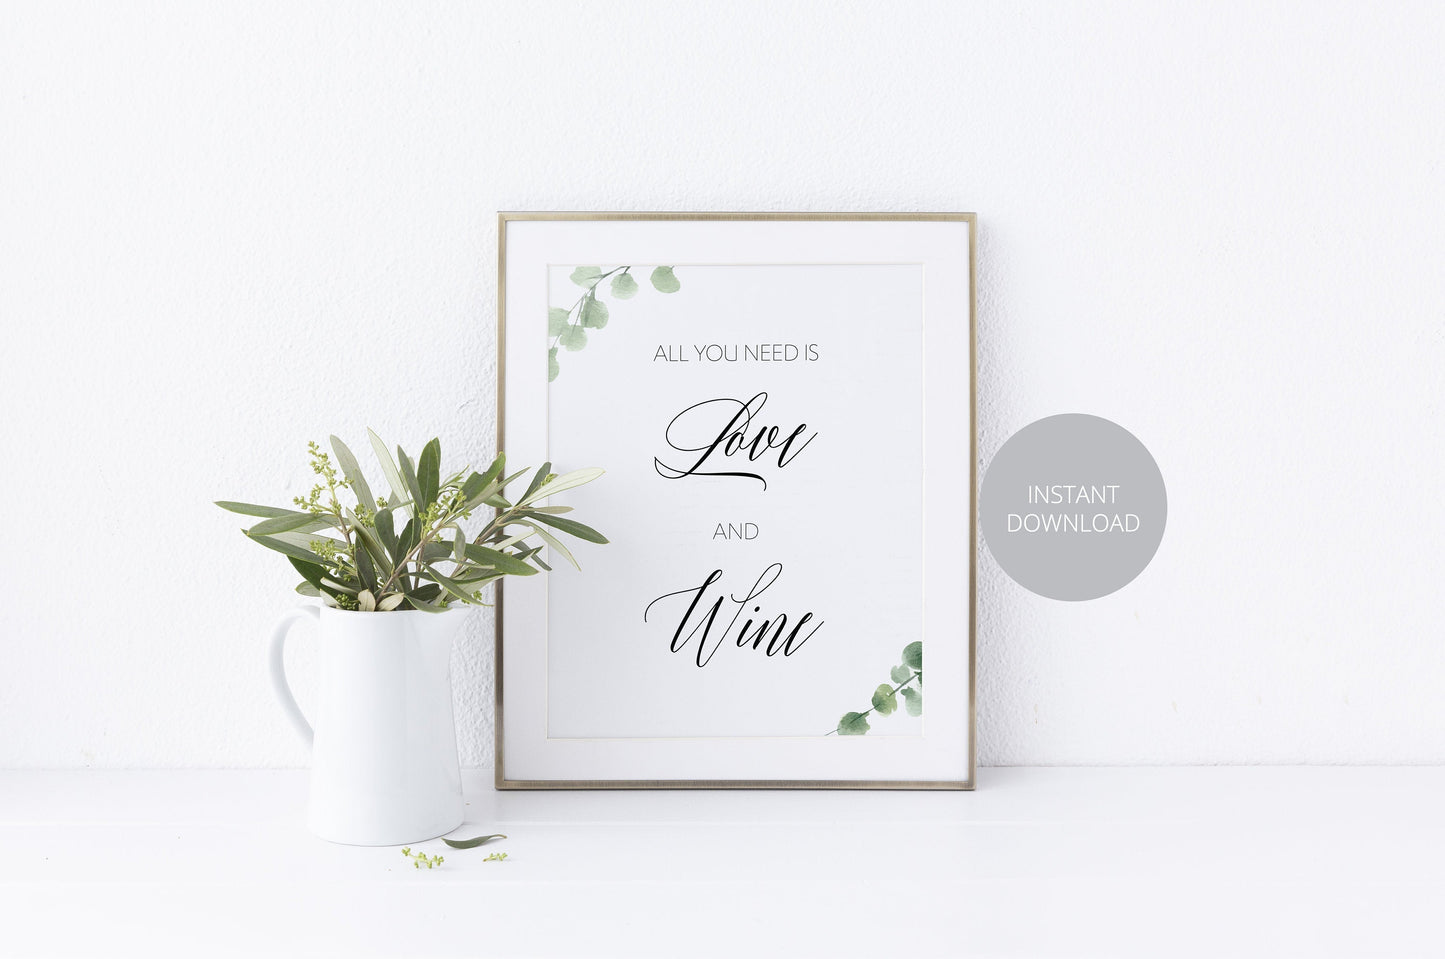 All You Need is Love and Wine Sign, Reception Decor, Wedding Sign,Greenery Wedding, Wedding Printable, Wine Bar, Instant Download SIGNS | PHOTO BOOTH SAVVY PAPER CO